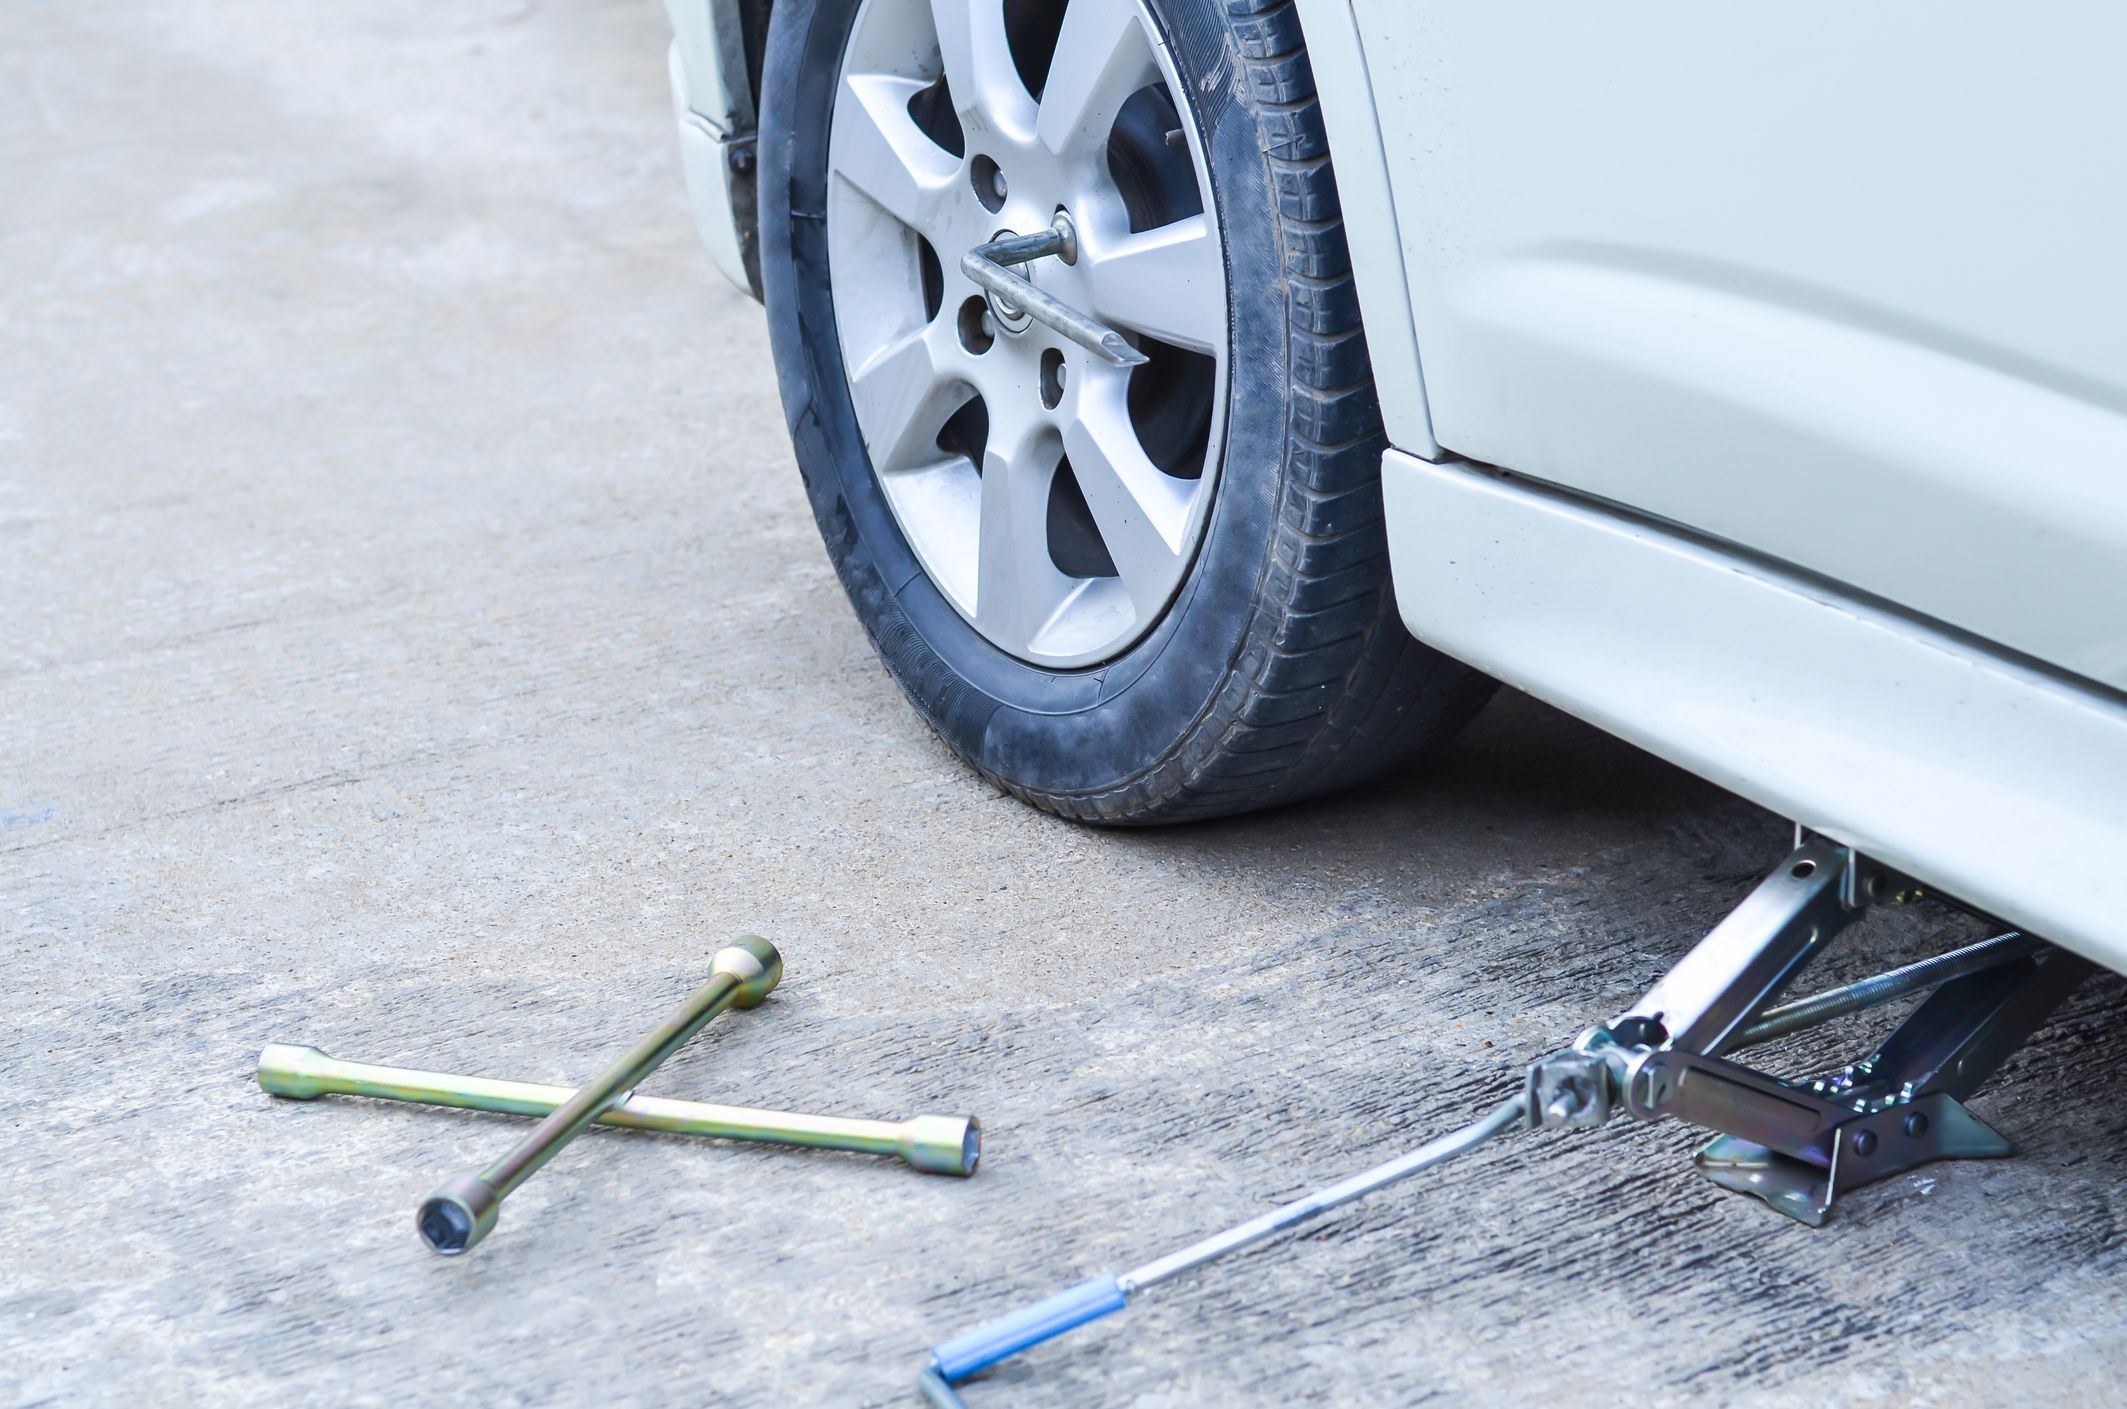 tool to lift car to change tire